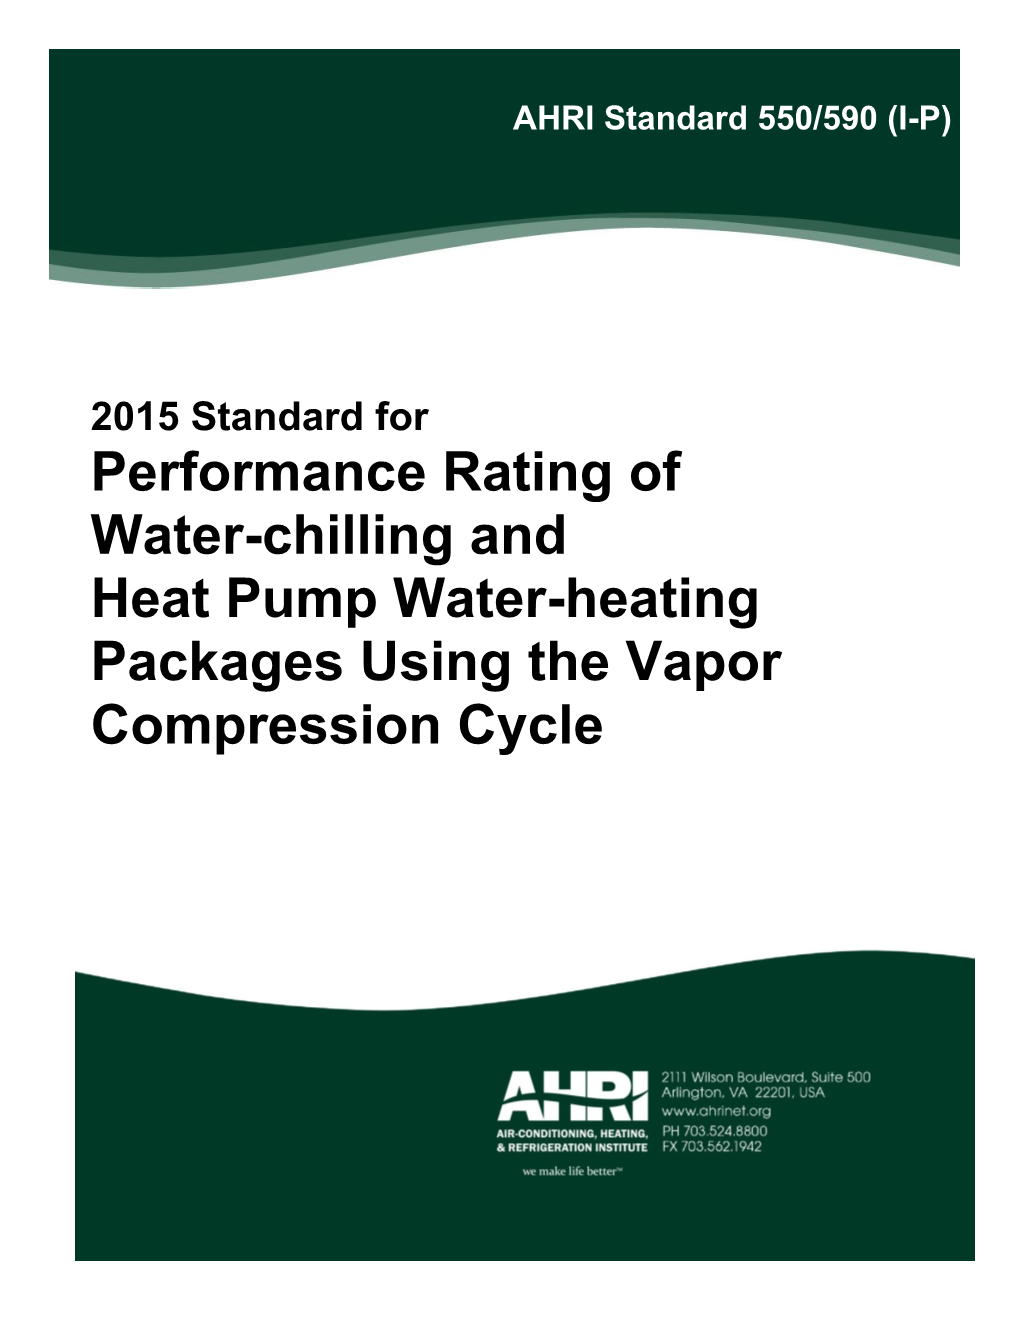 2015 Standard for Performance Rating of Water-Chilling and Heat Pump Water-Heating Packages Using the Vapor Compression Cycle